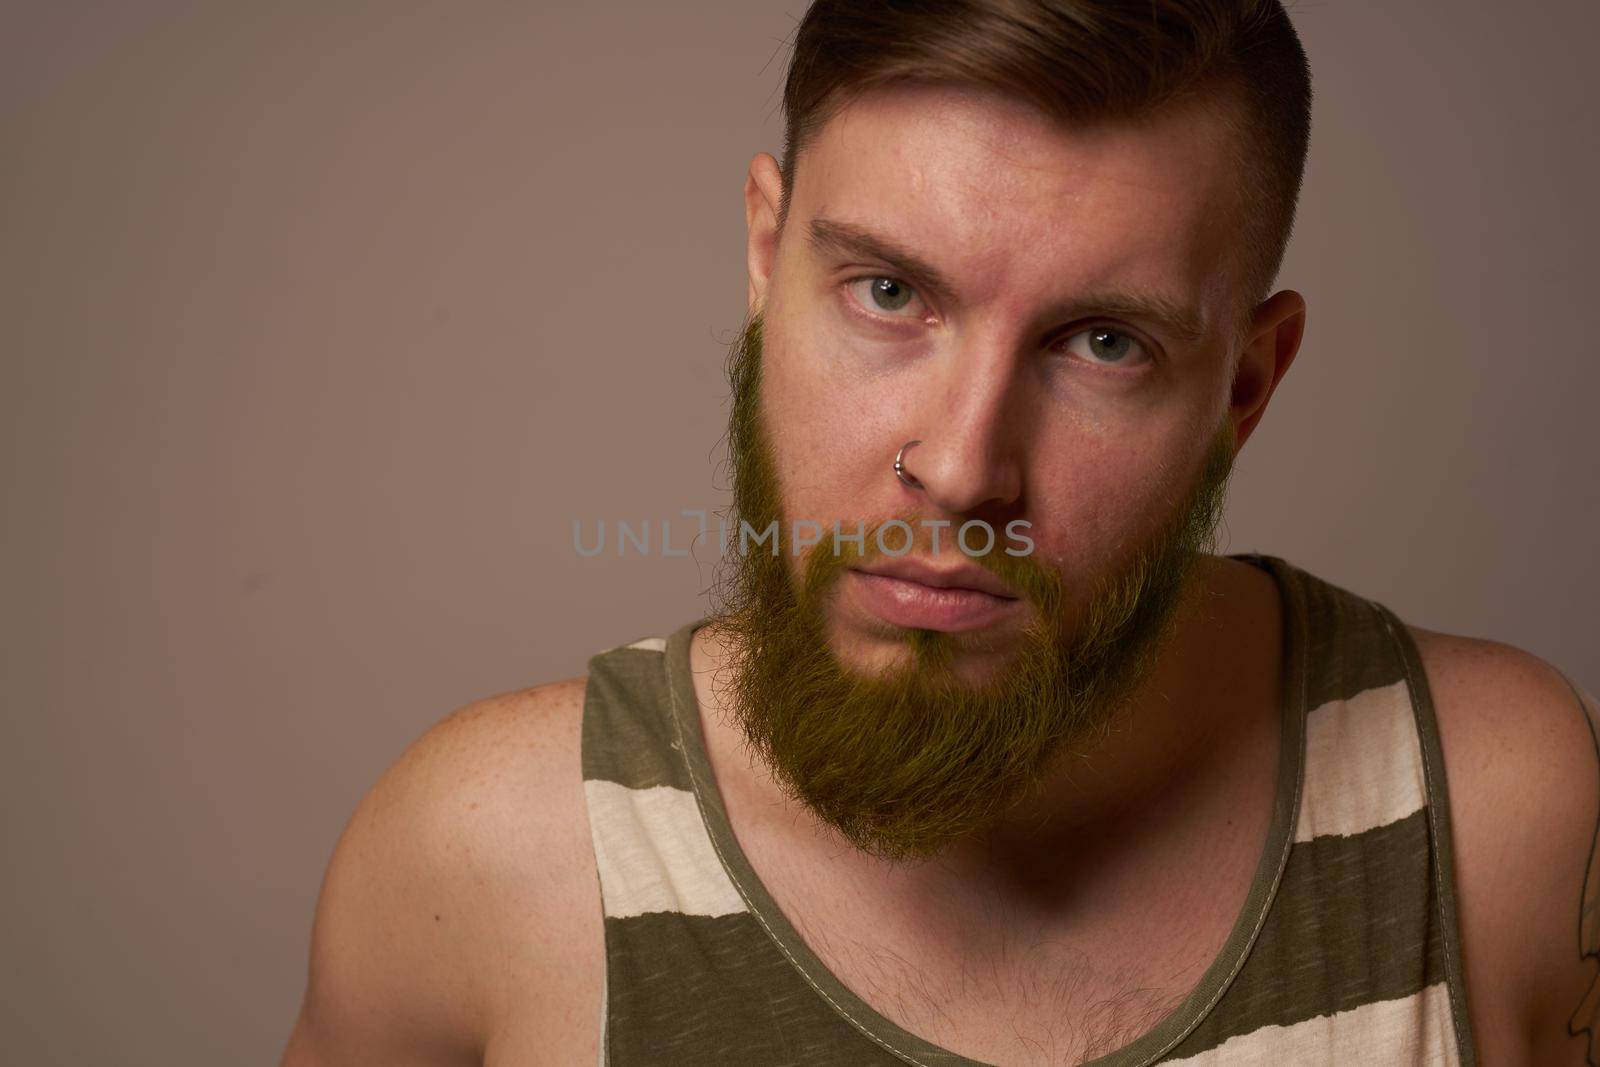 bearded man in striped t-shirt with tattoos posing studio. High quality photo